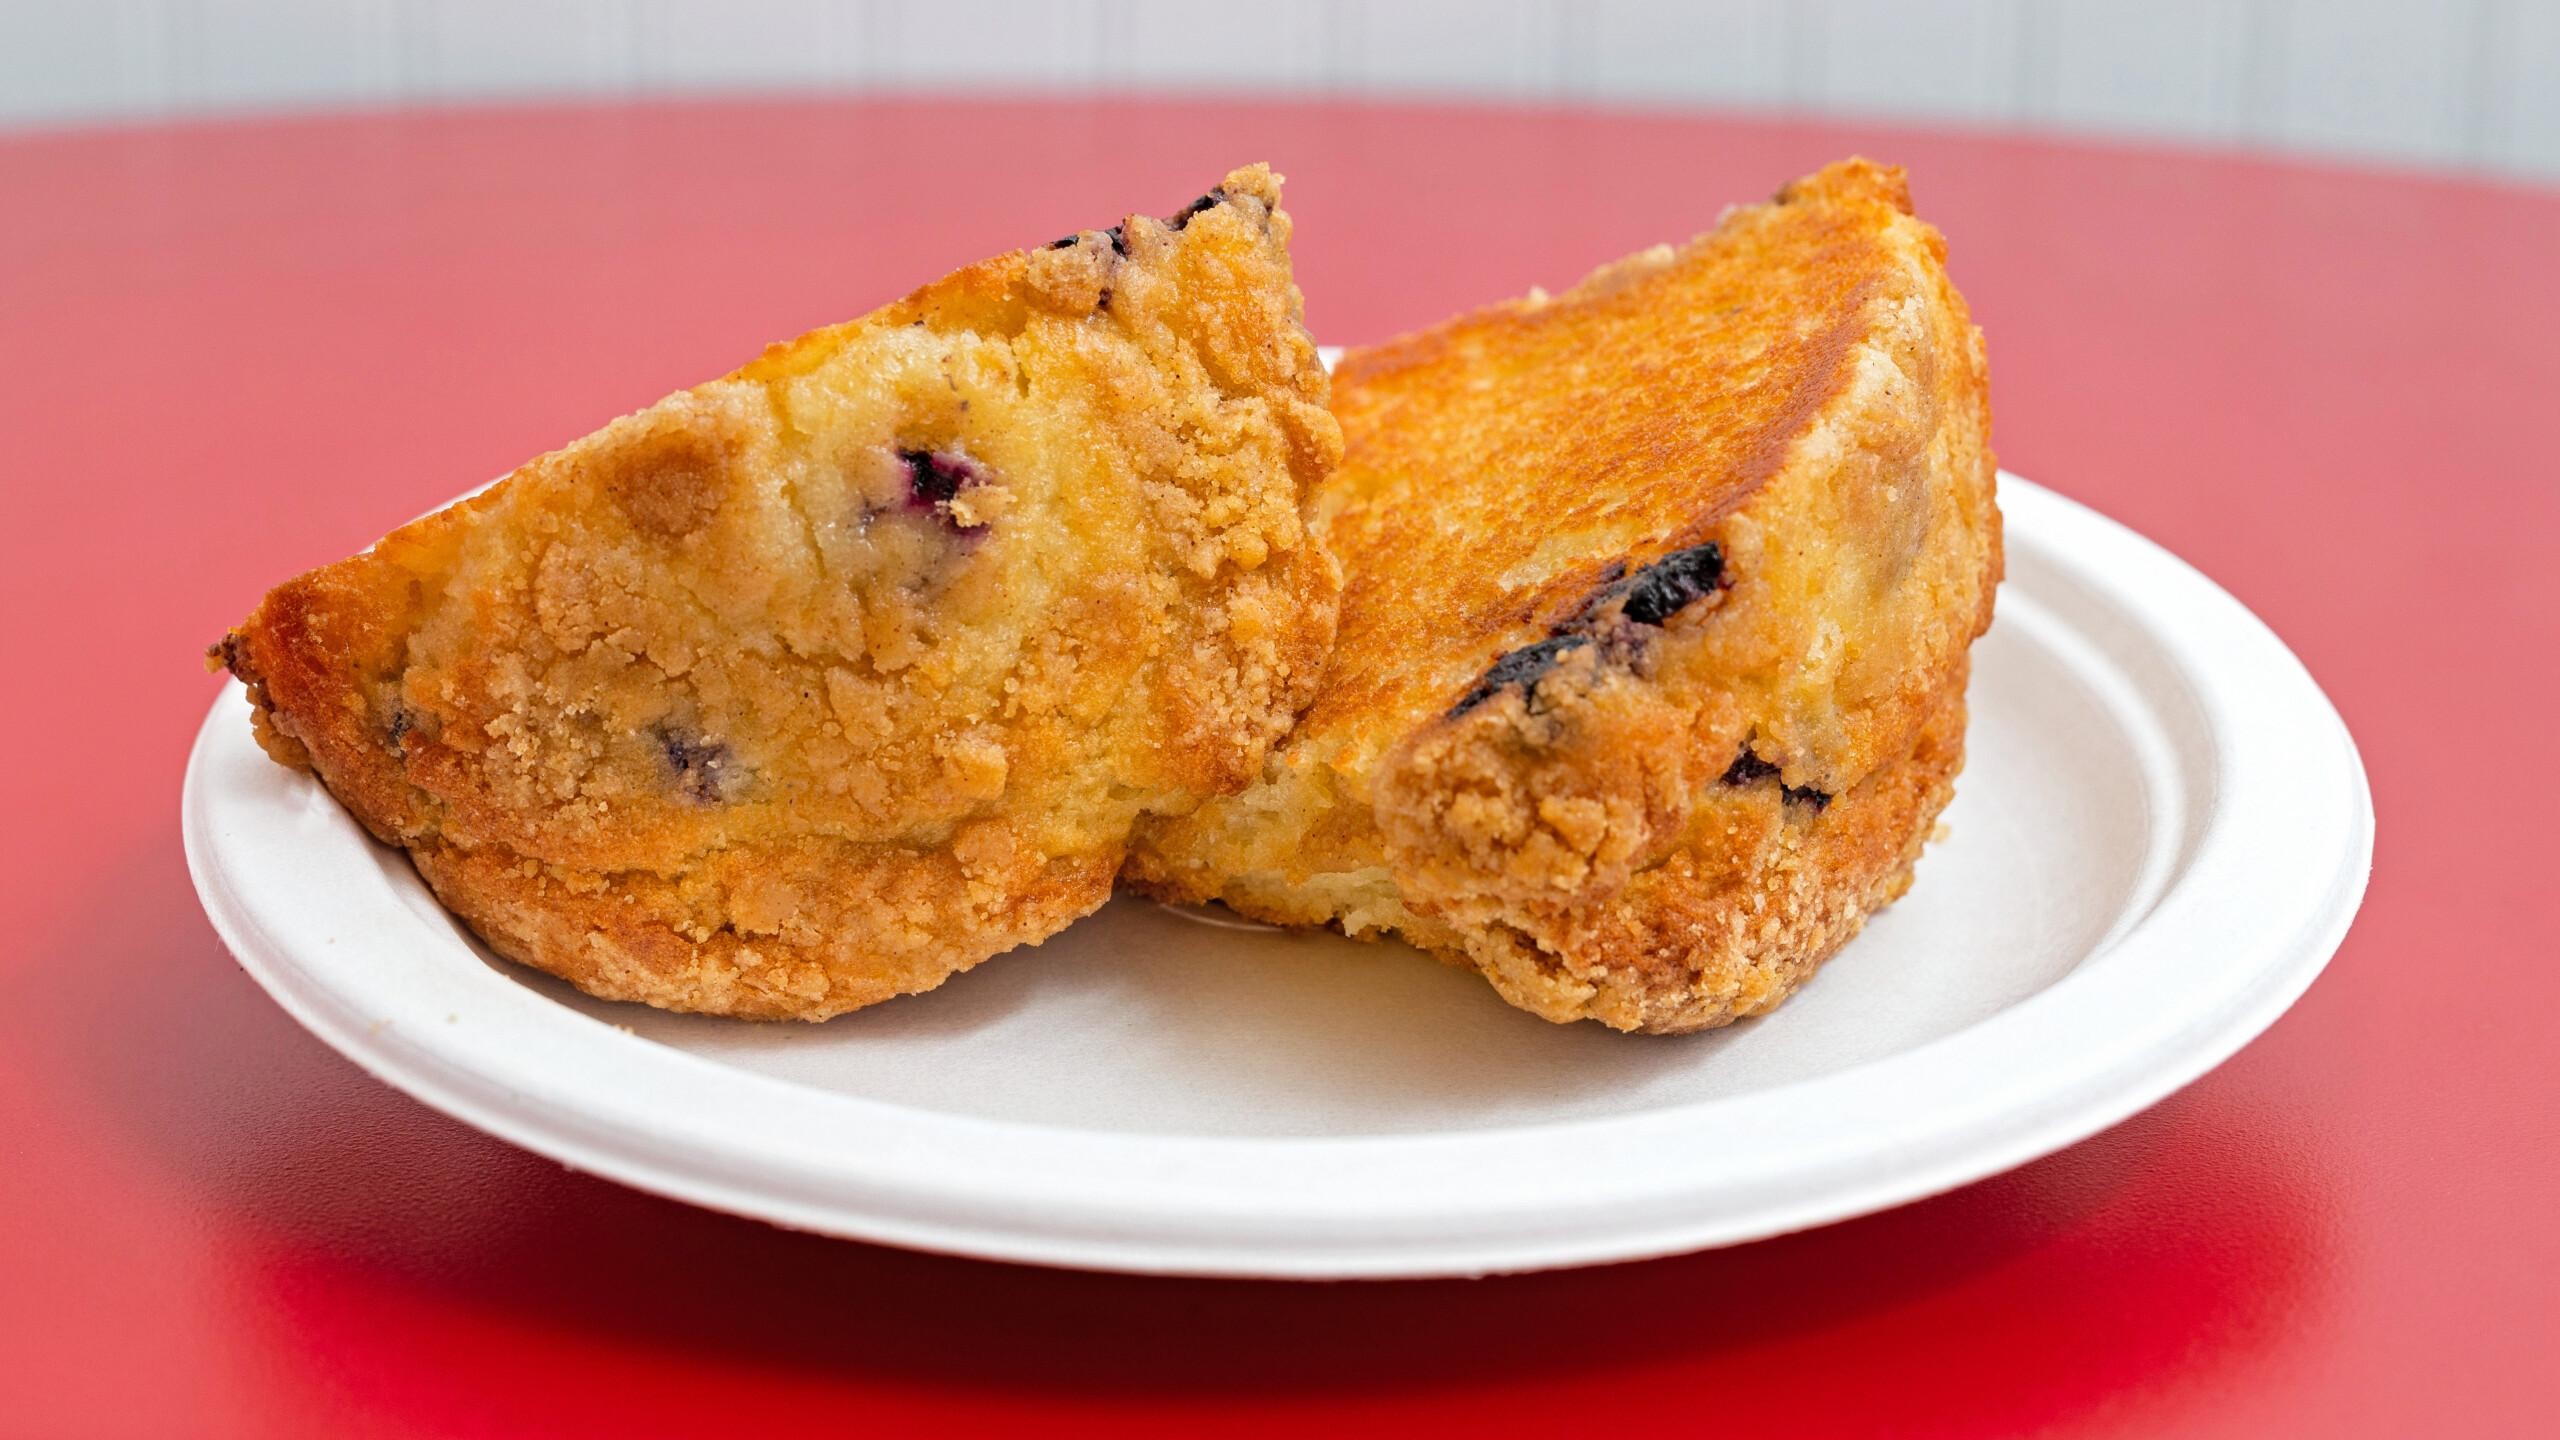 Grilled Blueberry Muffin